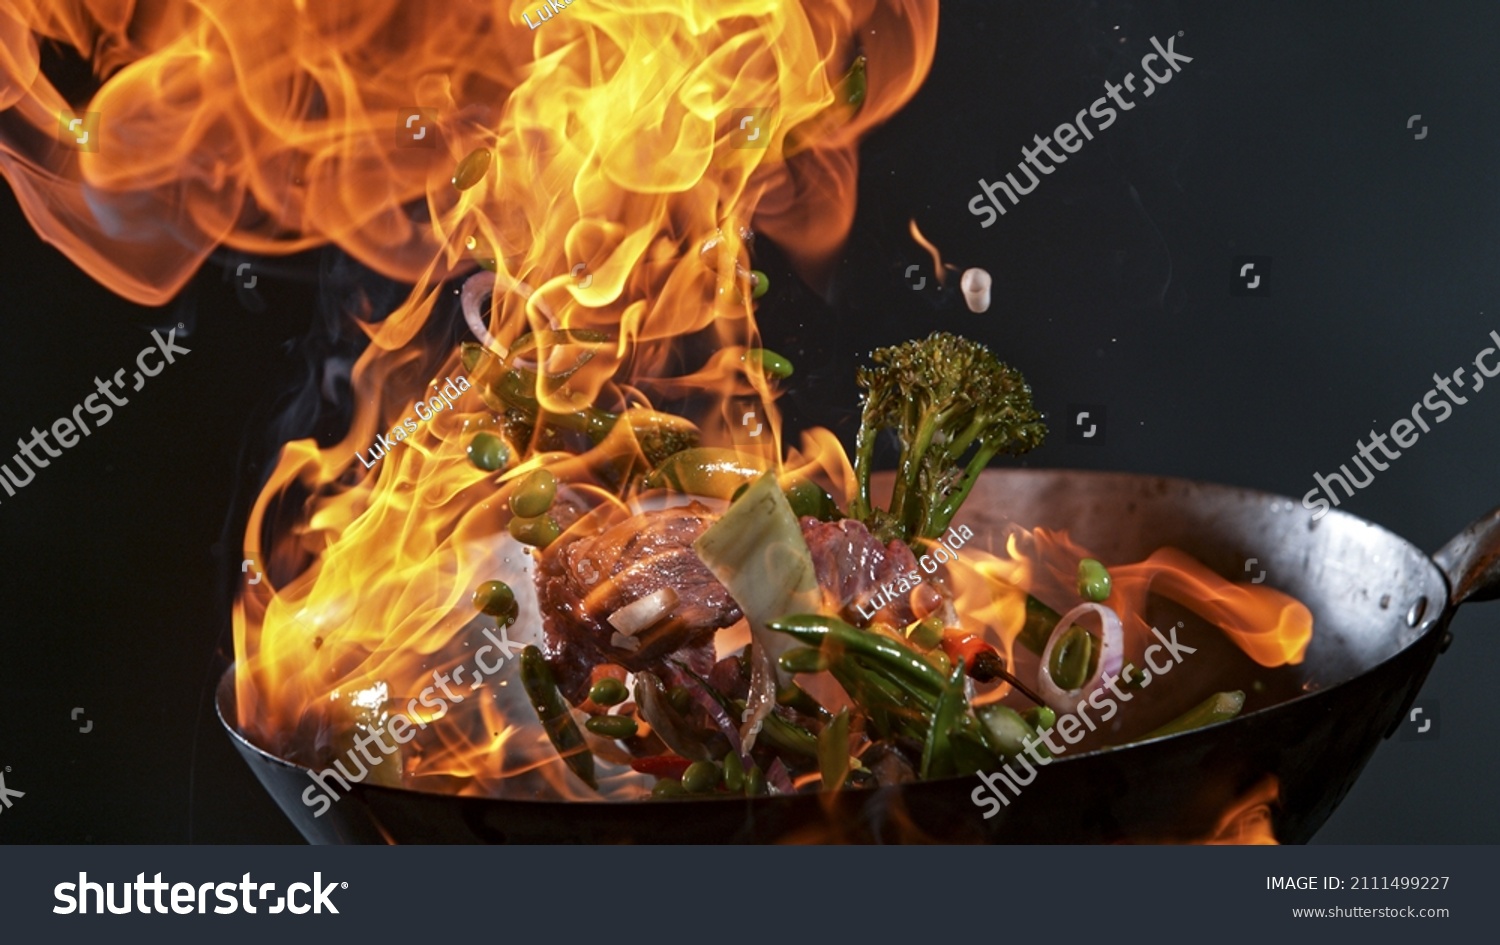 Freeze Motion of Wok Pan with Flying Ingredients in the Air and Fire Flames. #2111499227